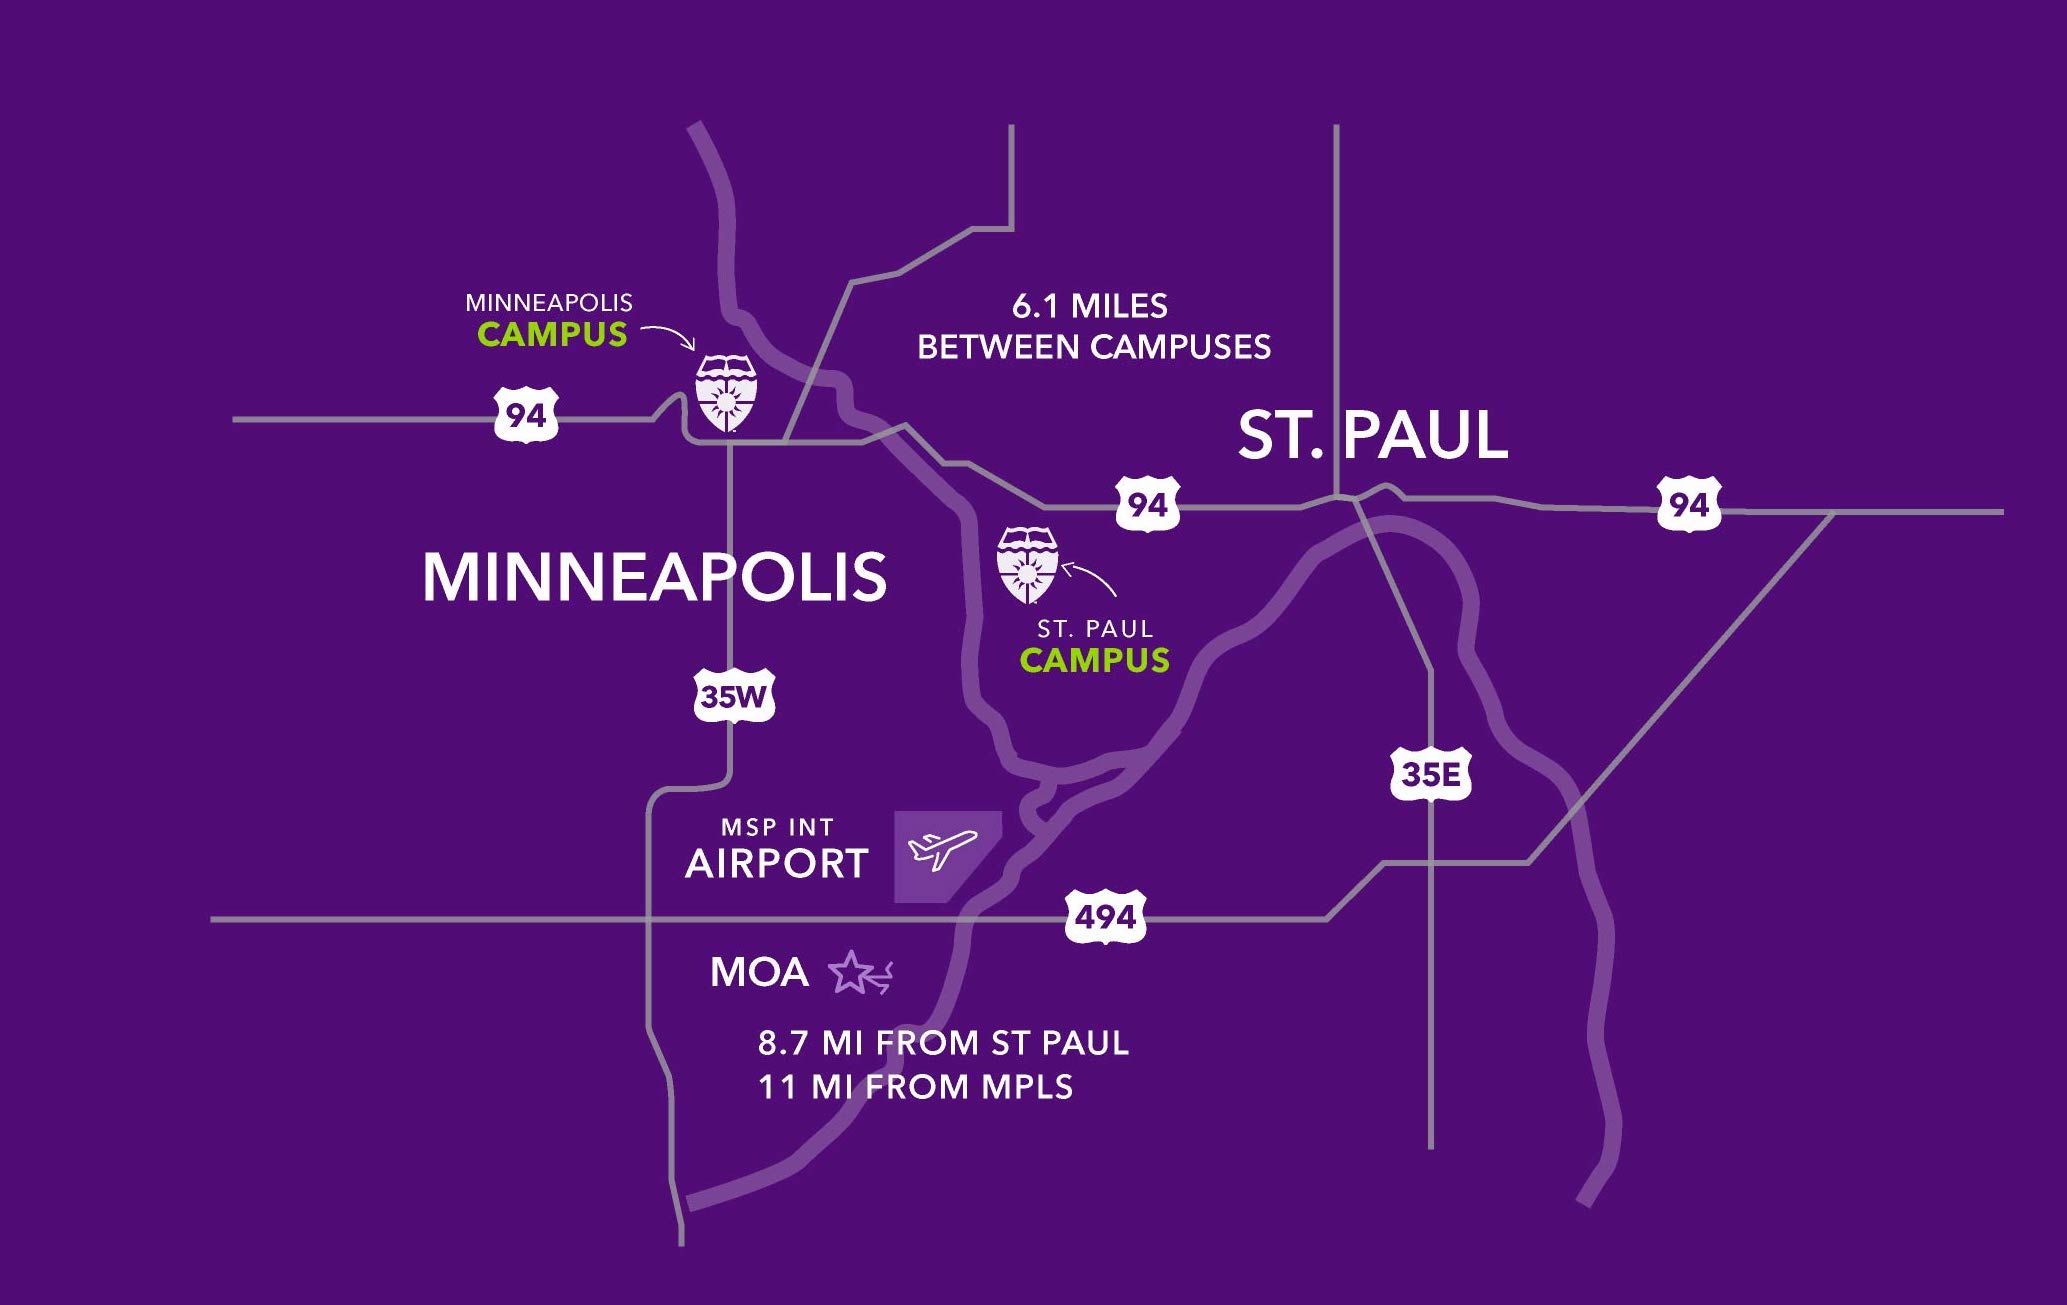 Purple map showing campus locations